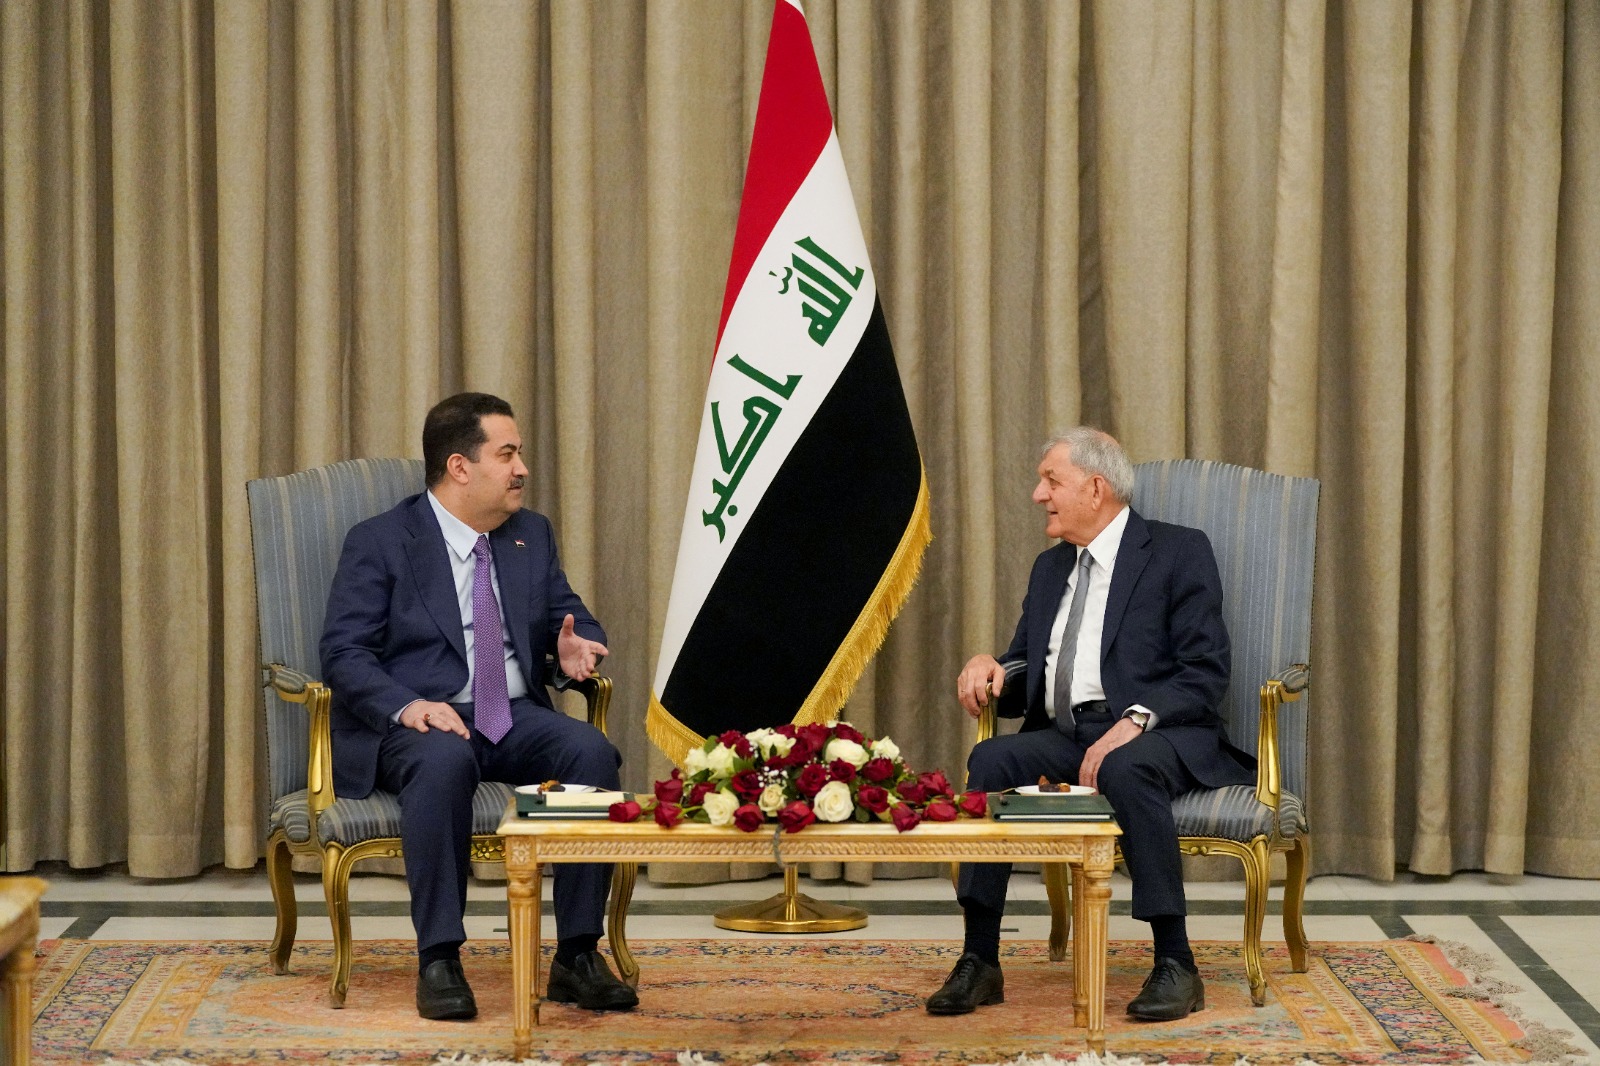 Palestinian Islamic Jihad leader meets with Iraq's President and PM